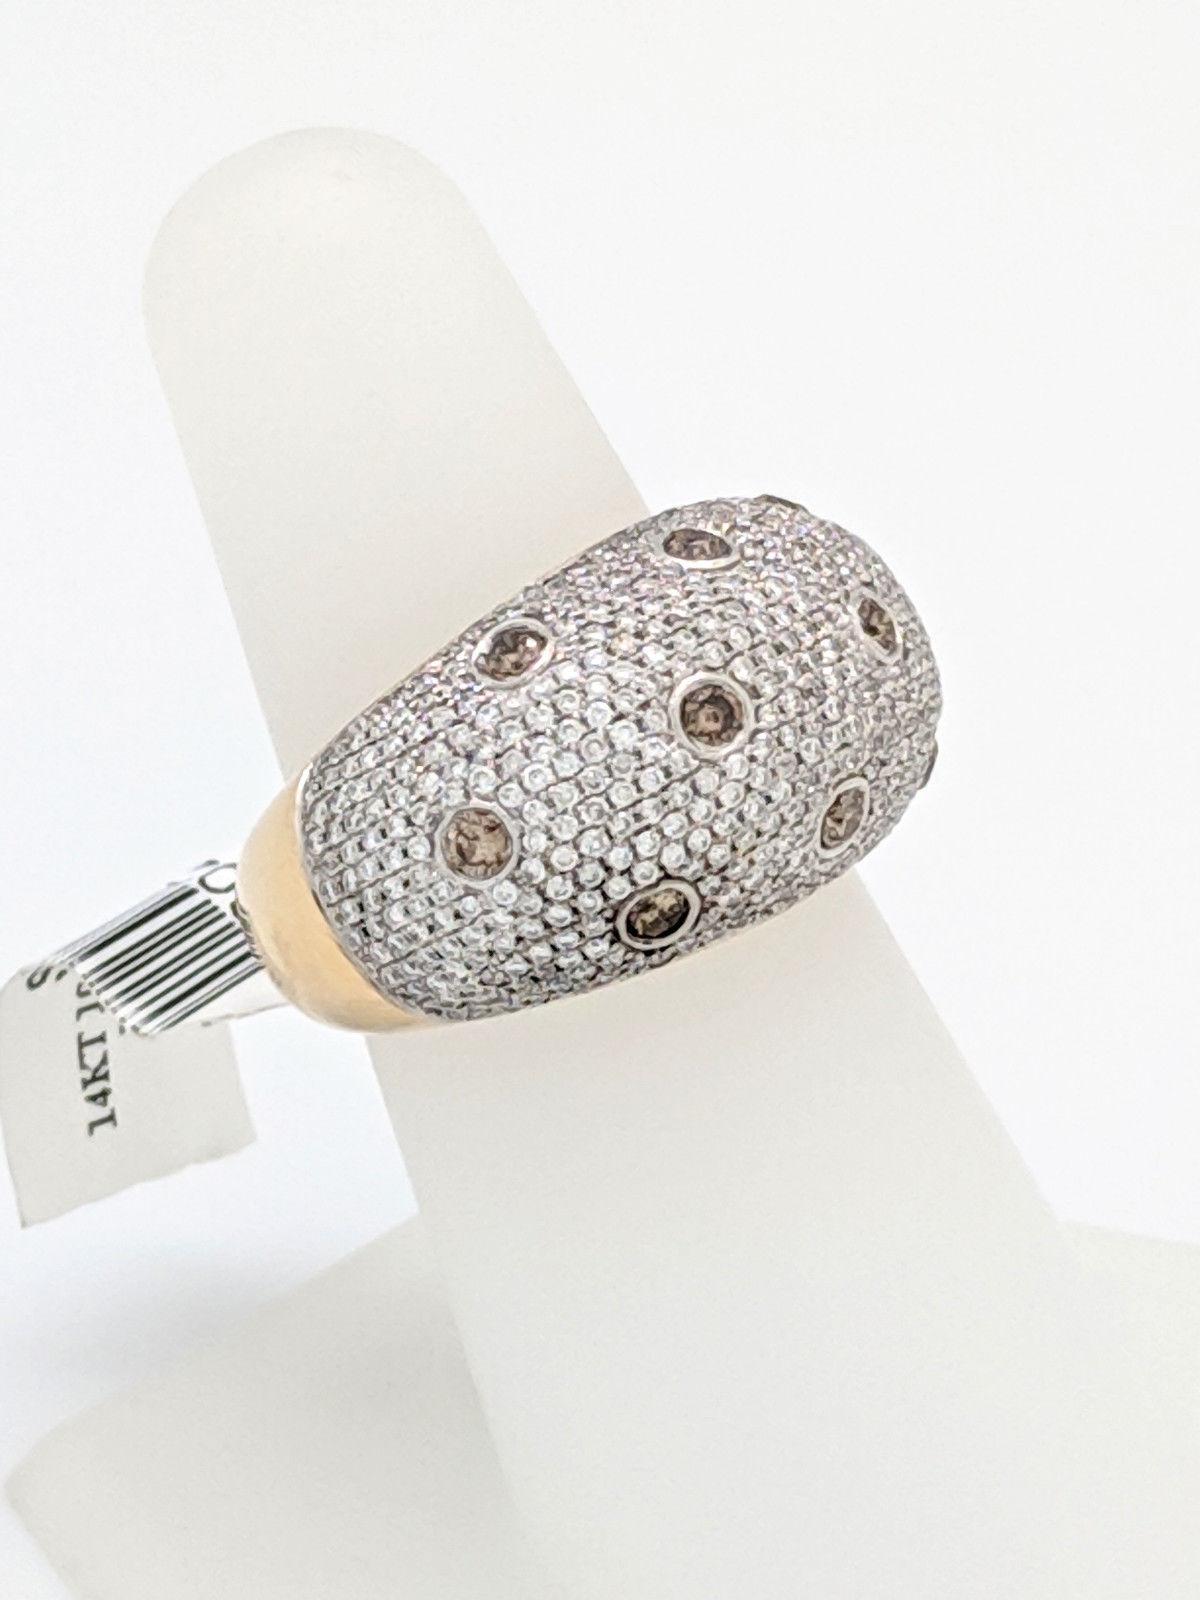 Contemporary 14 Karat White Gold 2.05 Carat White and Champagne Pave Diamond Dome Ring For Sale